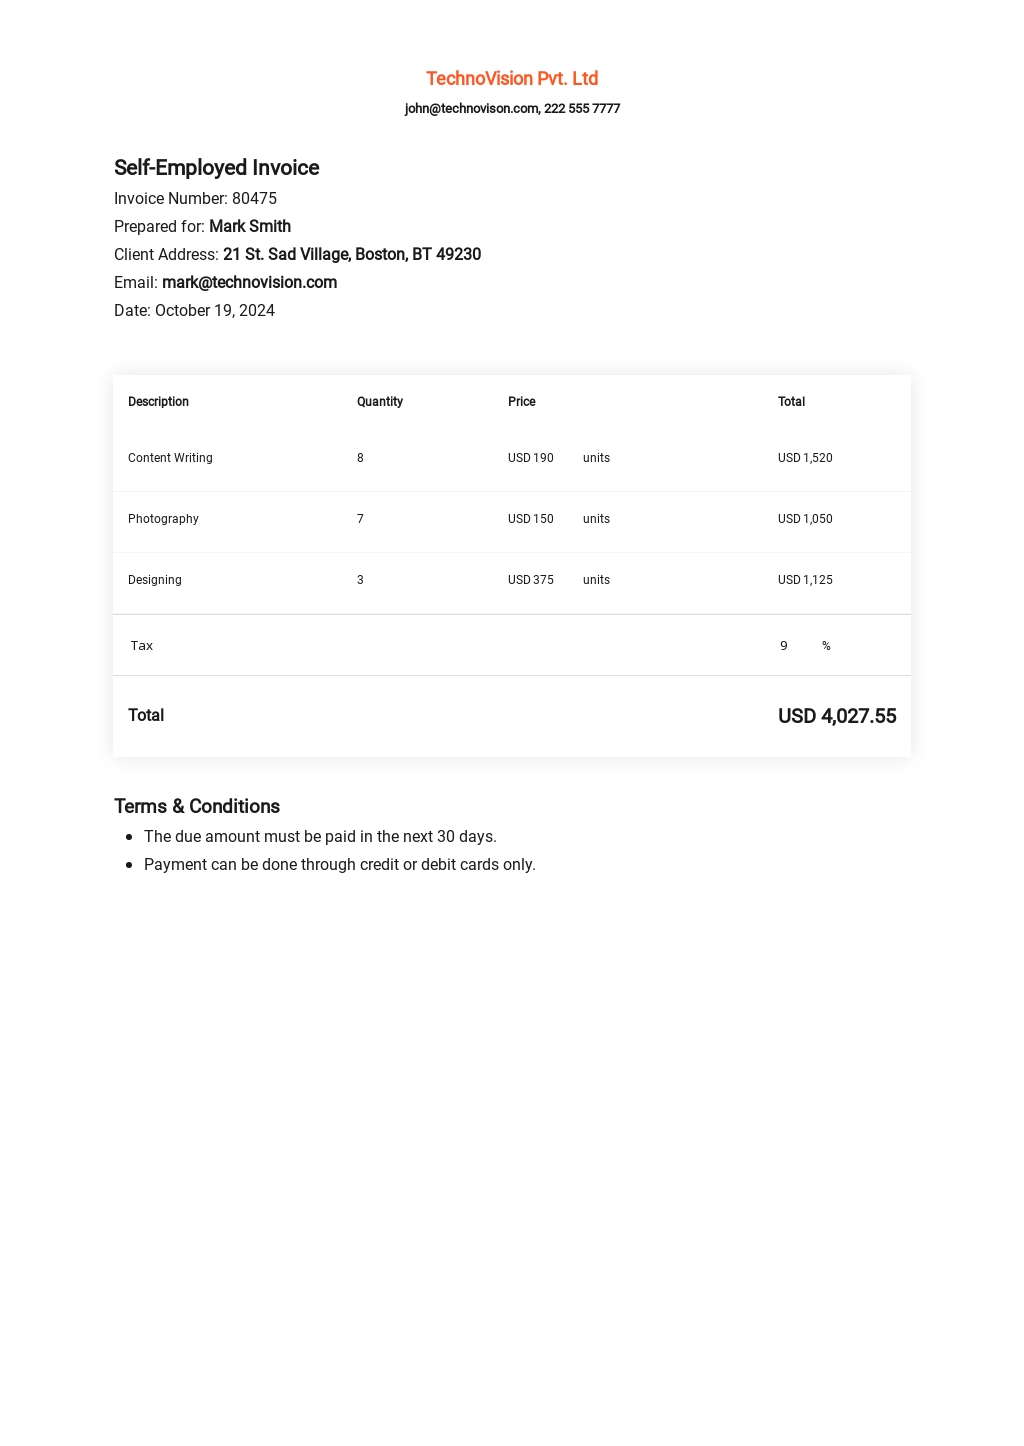 excel self employed printable invoice template